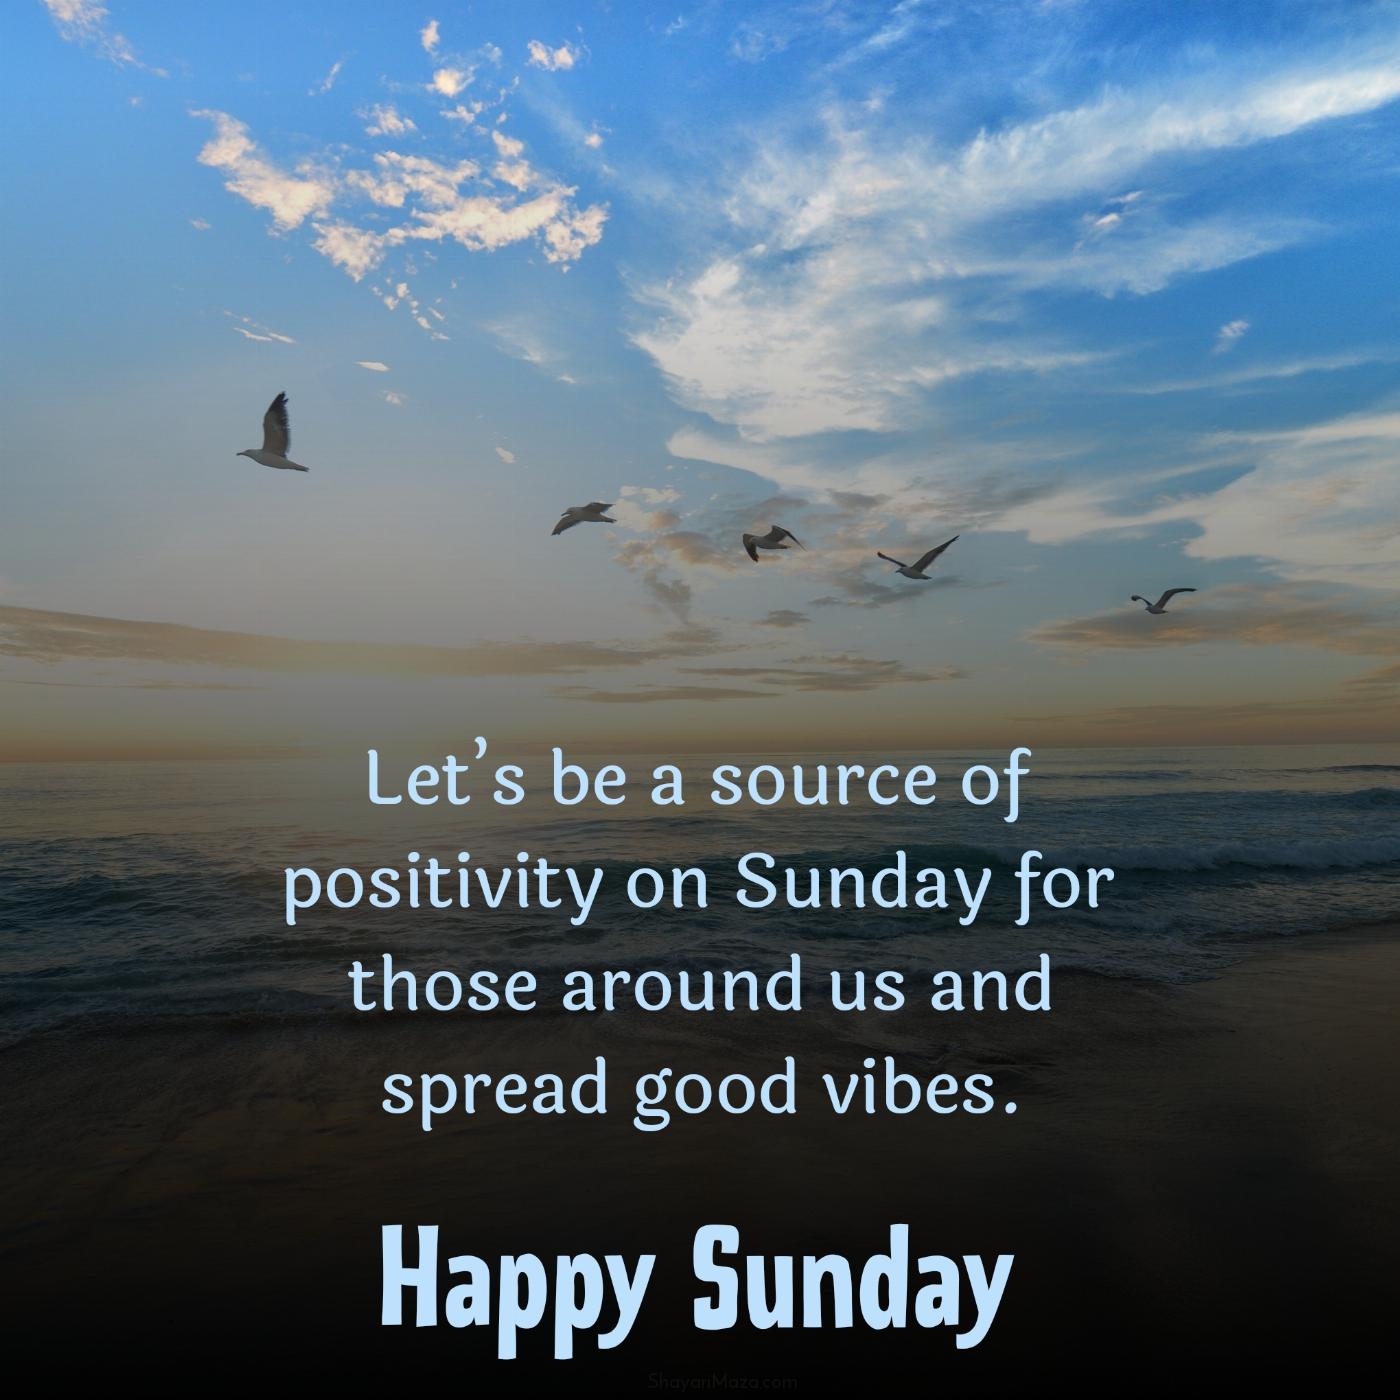 Lets be a source of positivity on Sunday for those around us